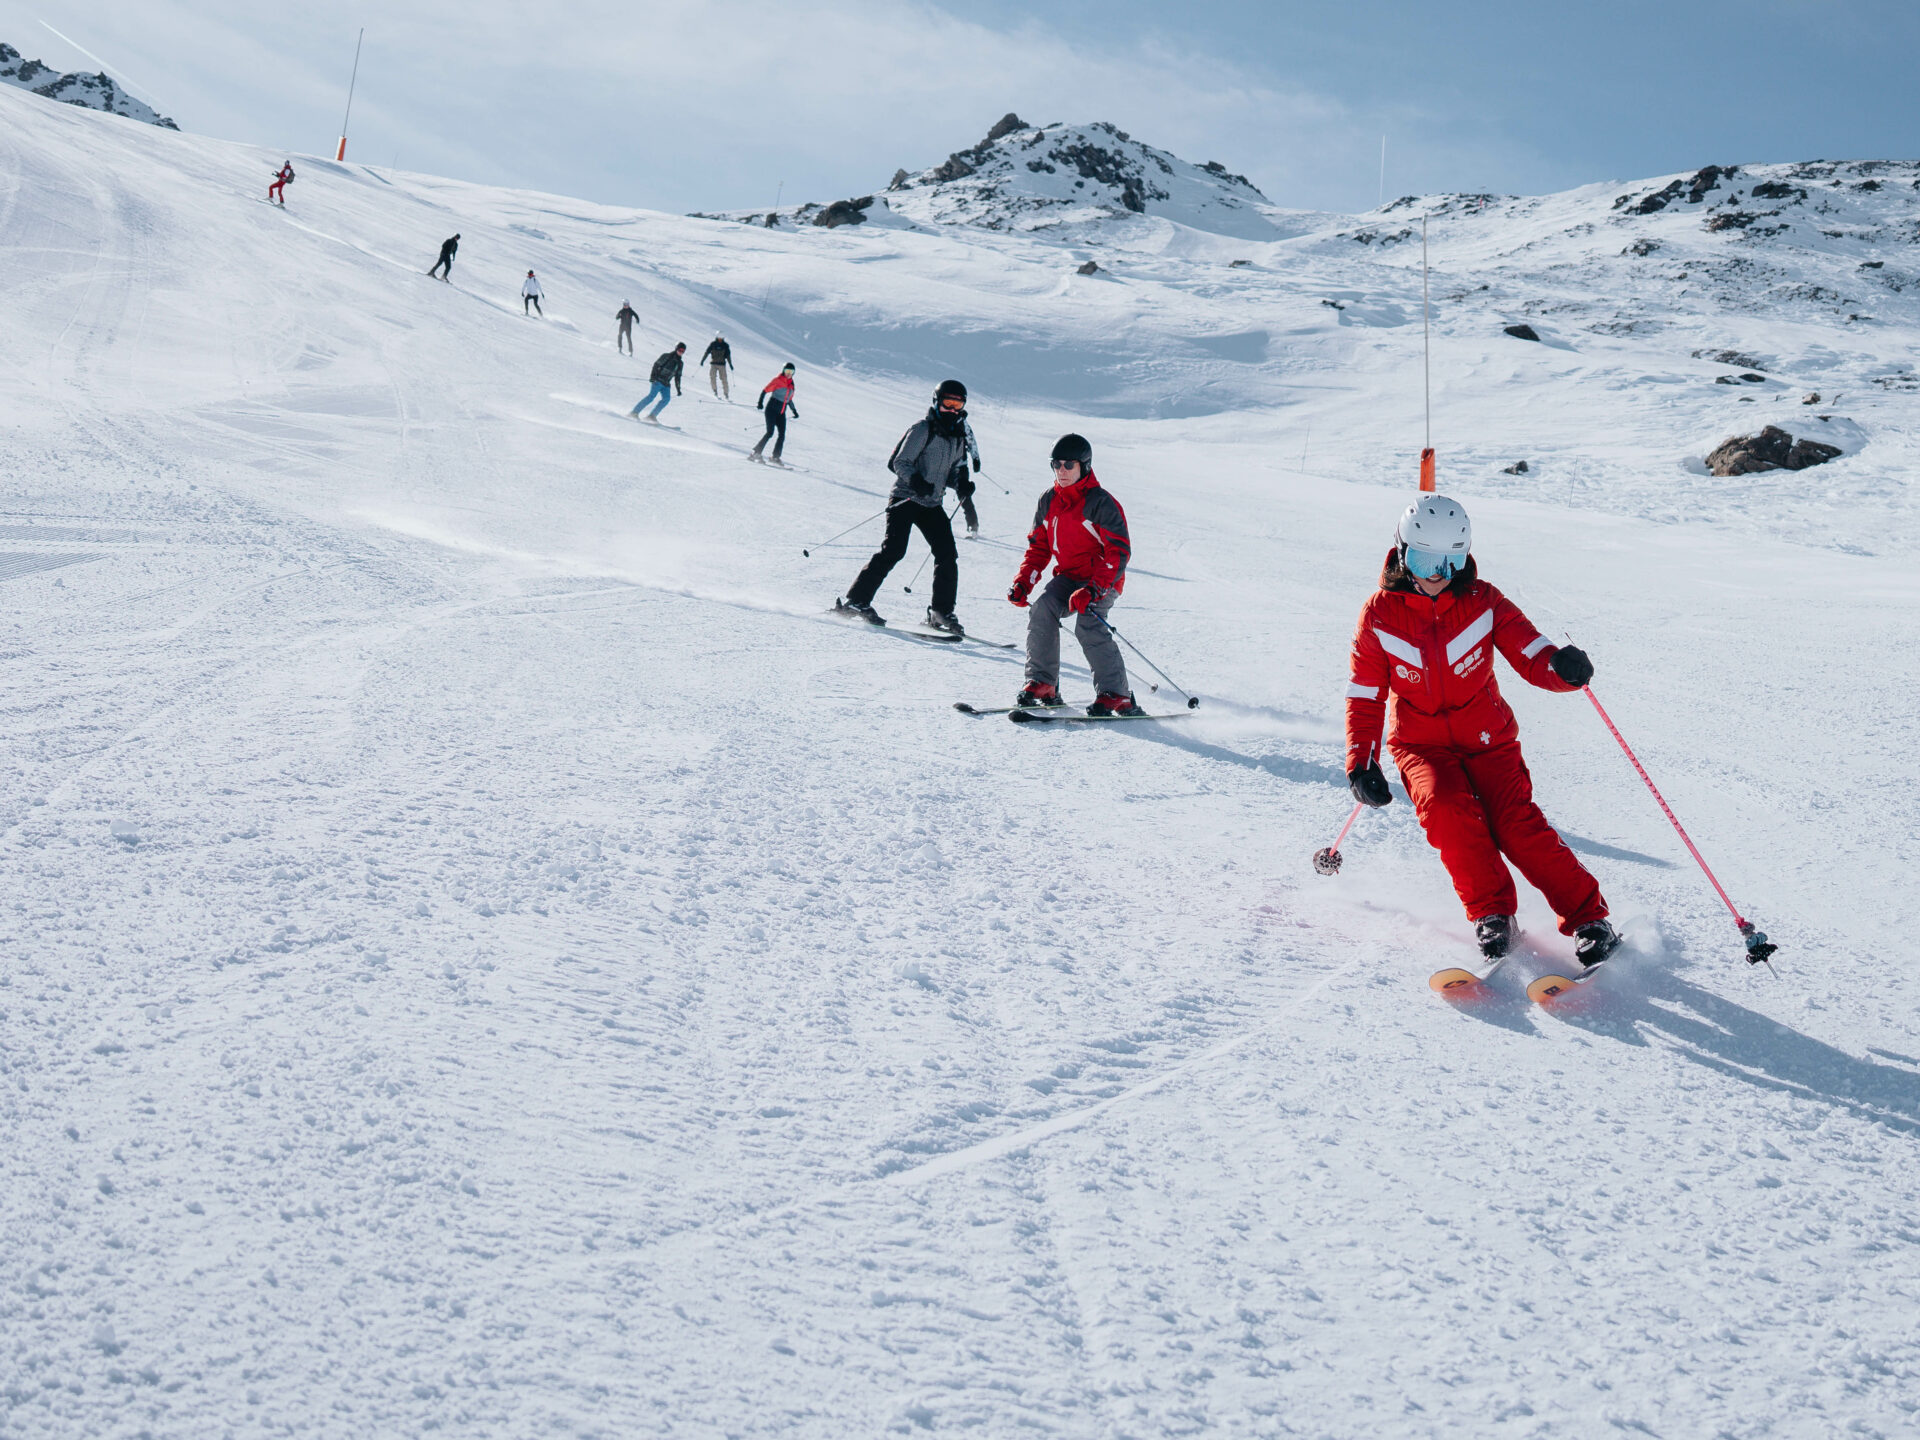 An ESF ski instructor leads skiers down the slopes